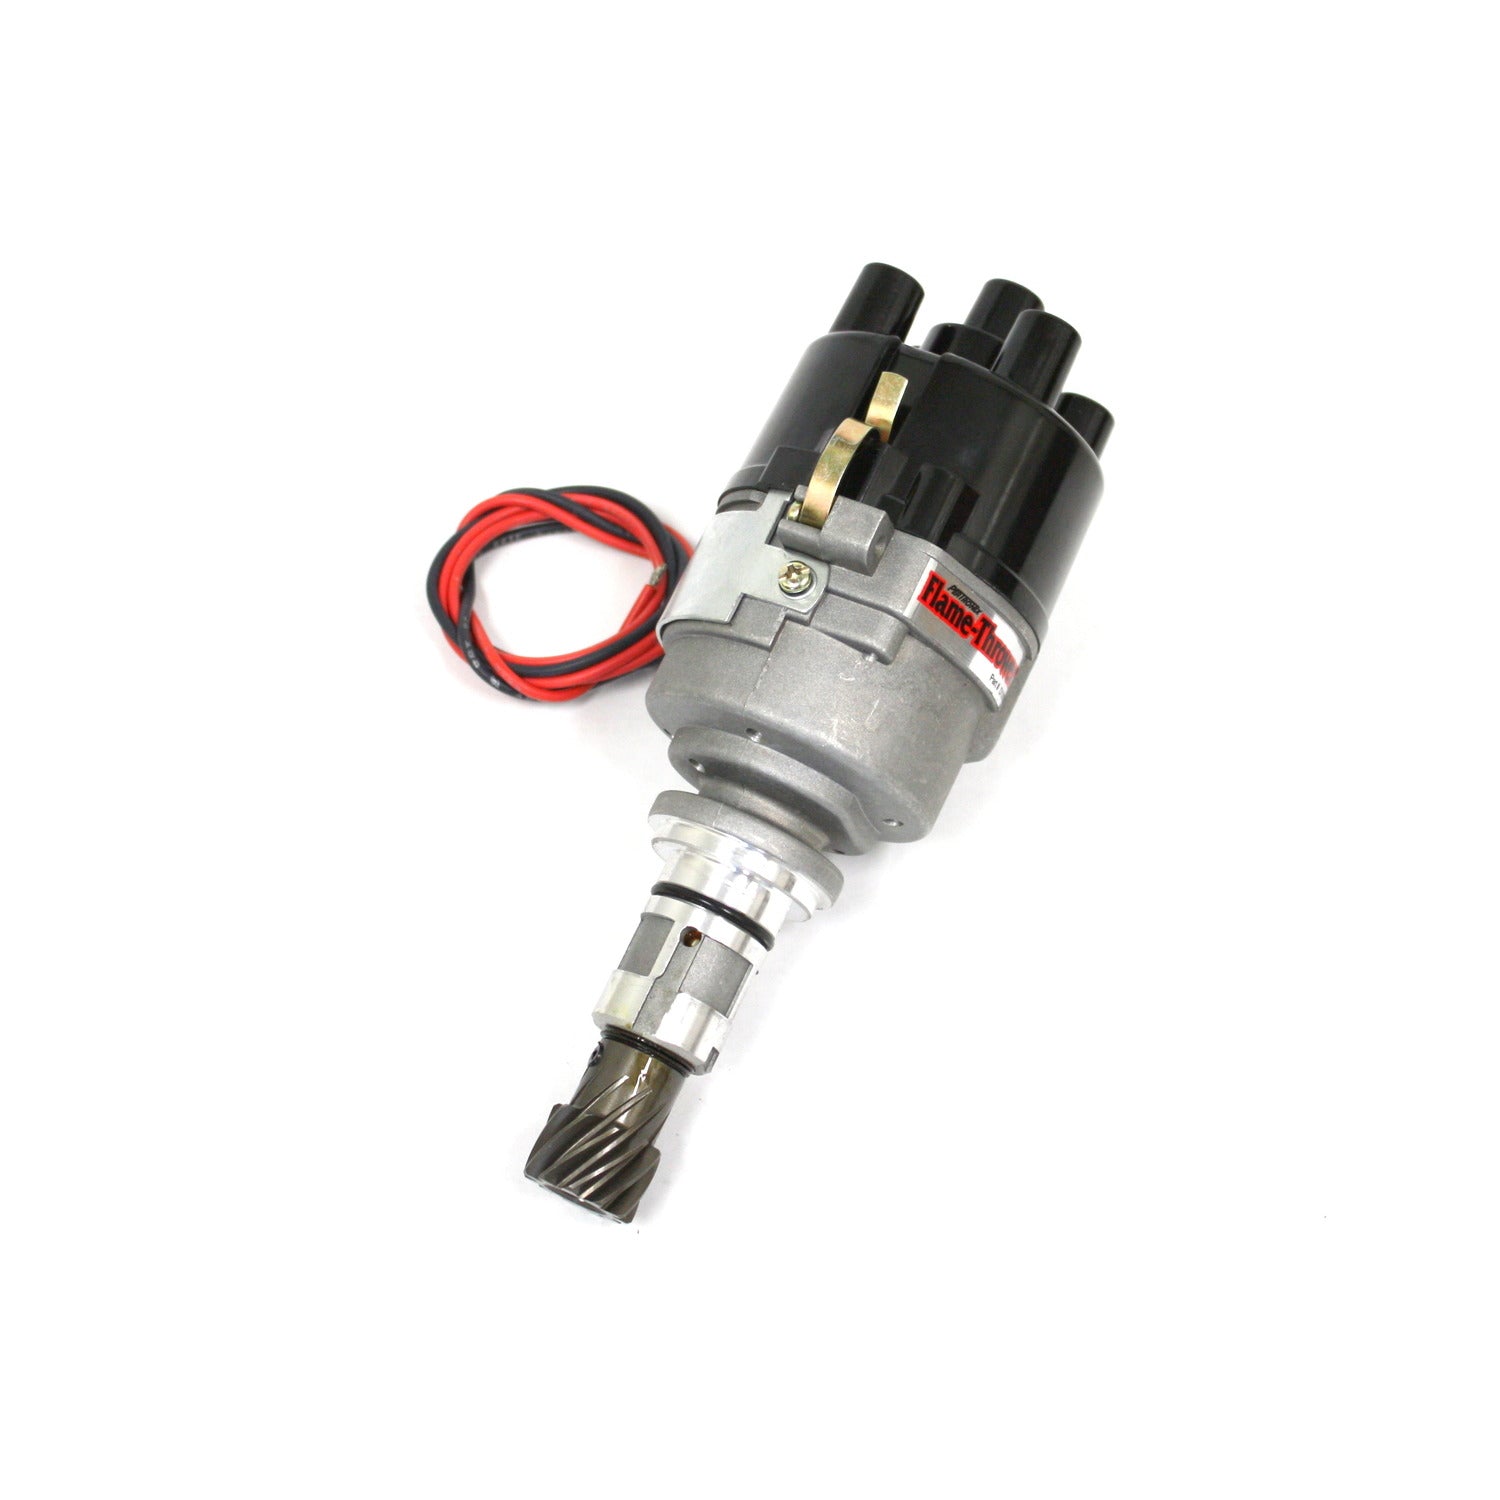 PerTronix D196500 Flame-Thrower Electronic Distributor Cast Ford X-Flow 4 cyl Plug and Play with Ignitor Non Vacuum Top Exit Cap